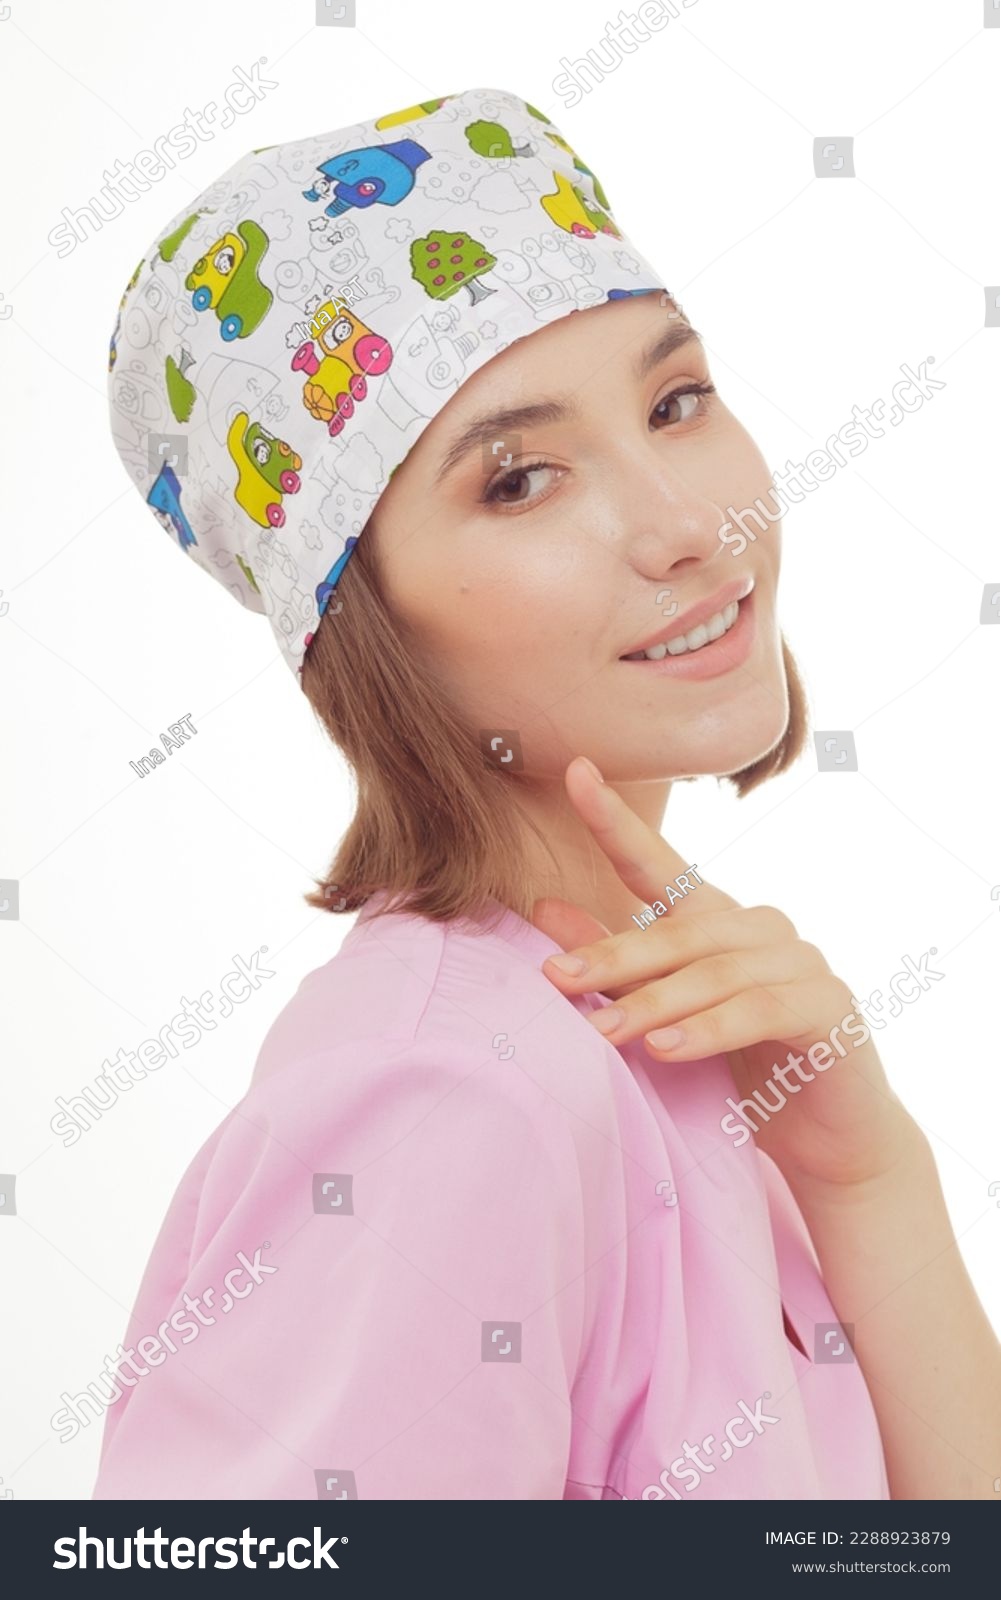 Catalog headshots of surgical scull hat, young female health professional posing on white background in studio. Kids Dentist headwear photo shoot. #2288923879